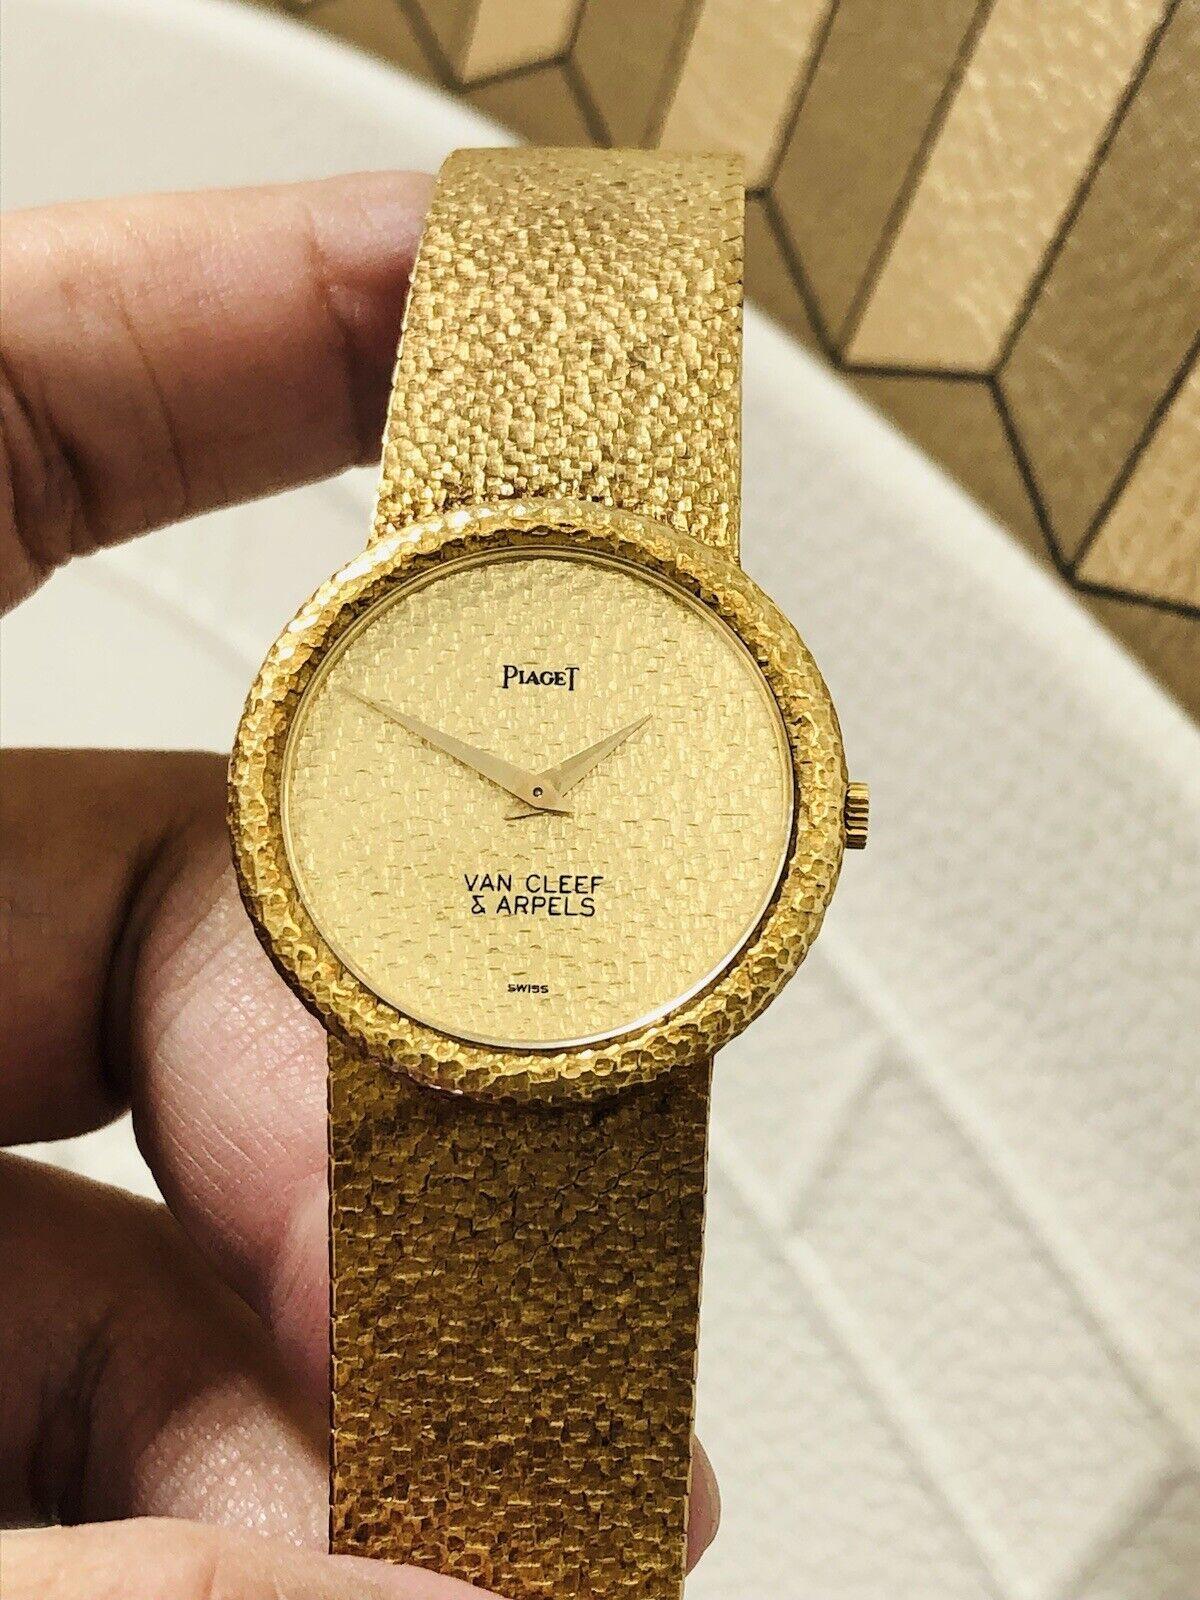 Van Cleef & Arpels Piaget 18k Hammered Yellow Gold Watch Men's Circa 1970s

Here is your chance to purchase a beautiful and highly collectible designer watch!

The dial is 100% original in champagne with original solid gold sword hands and